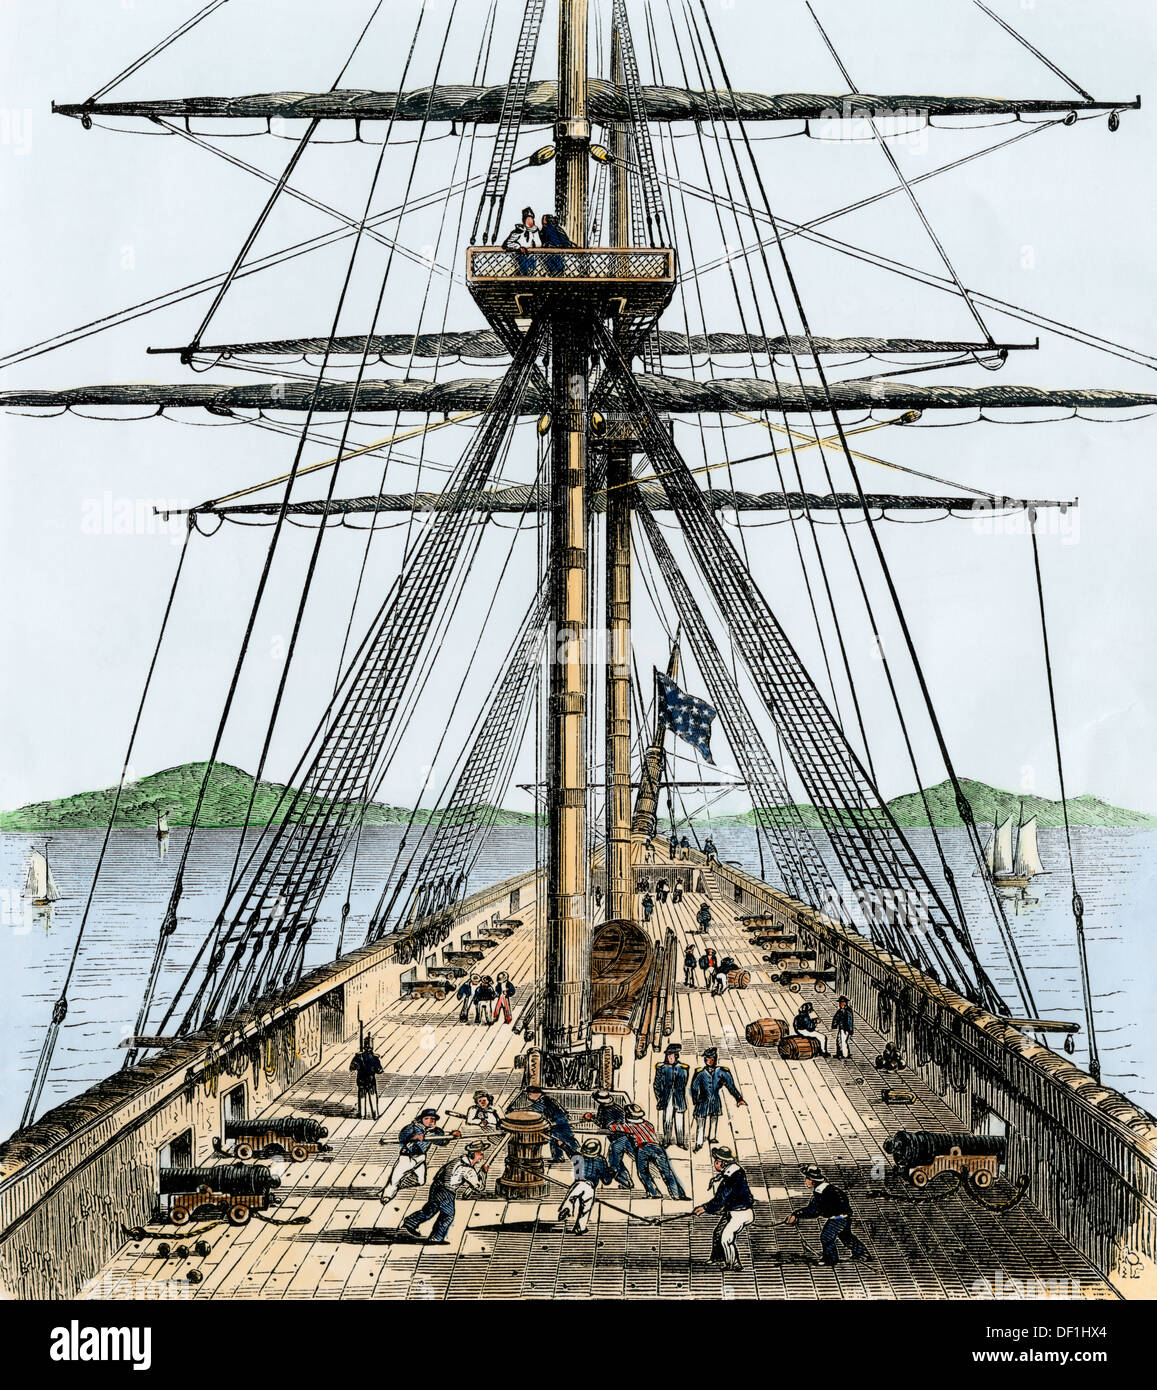 Deck of American battleship, 1850s. Hand-colored woodcut Stock Photo